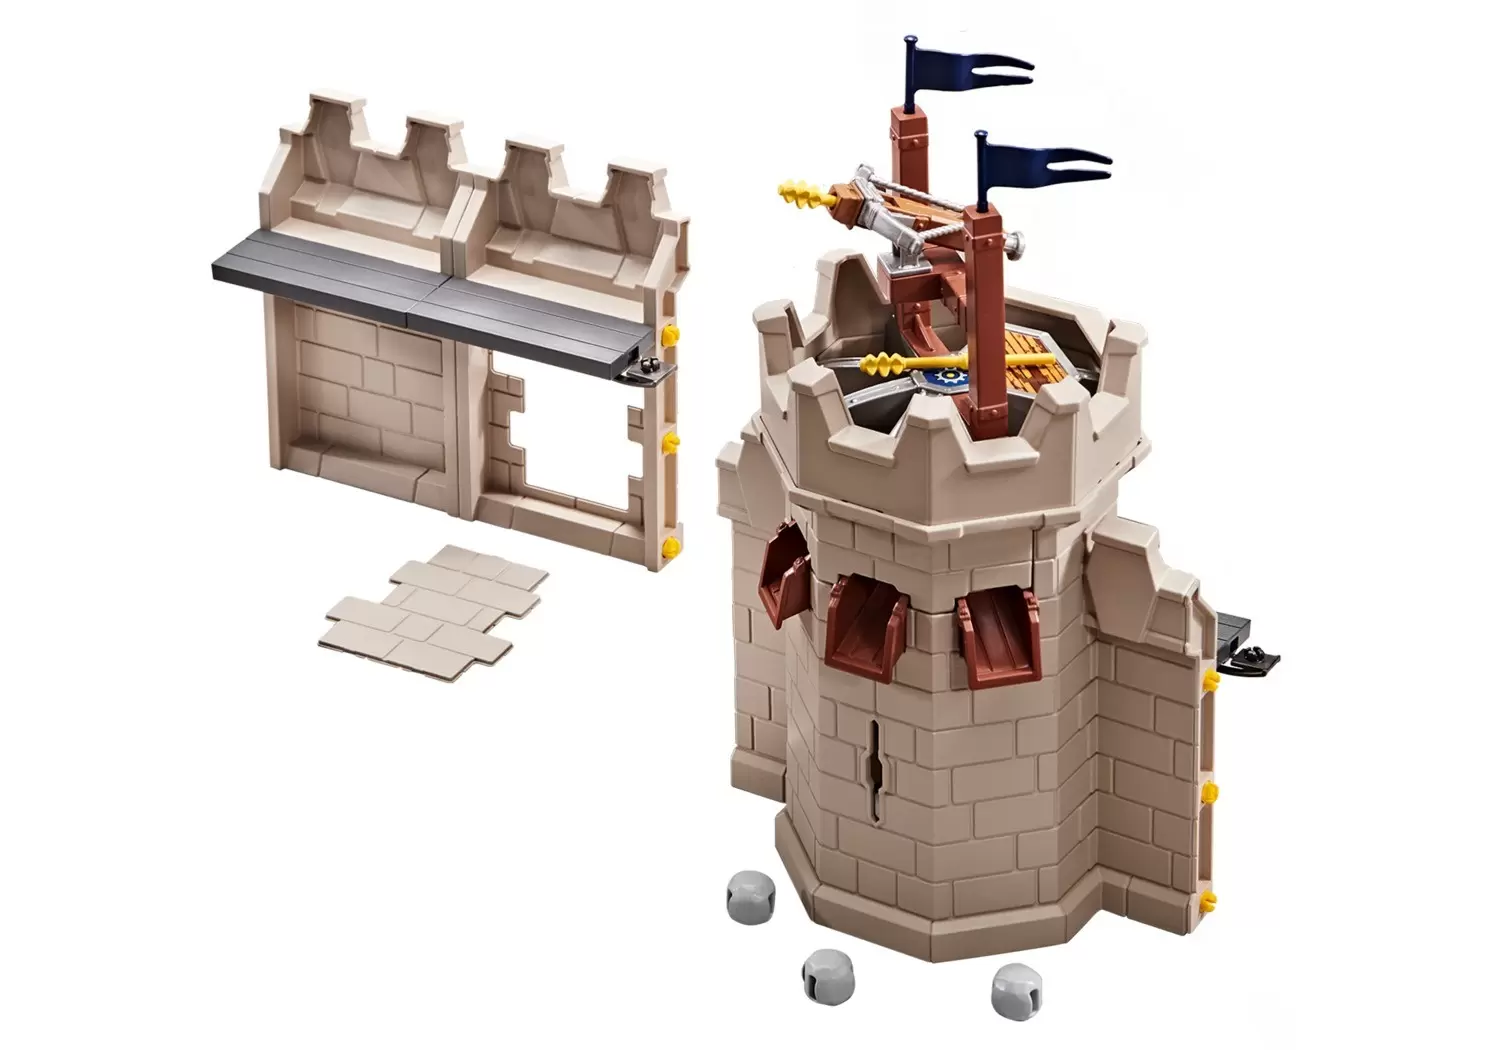 Playmobil Accessories & decorations - Tower extension with stone throw-off for the Great Castle of Novelmore